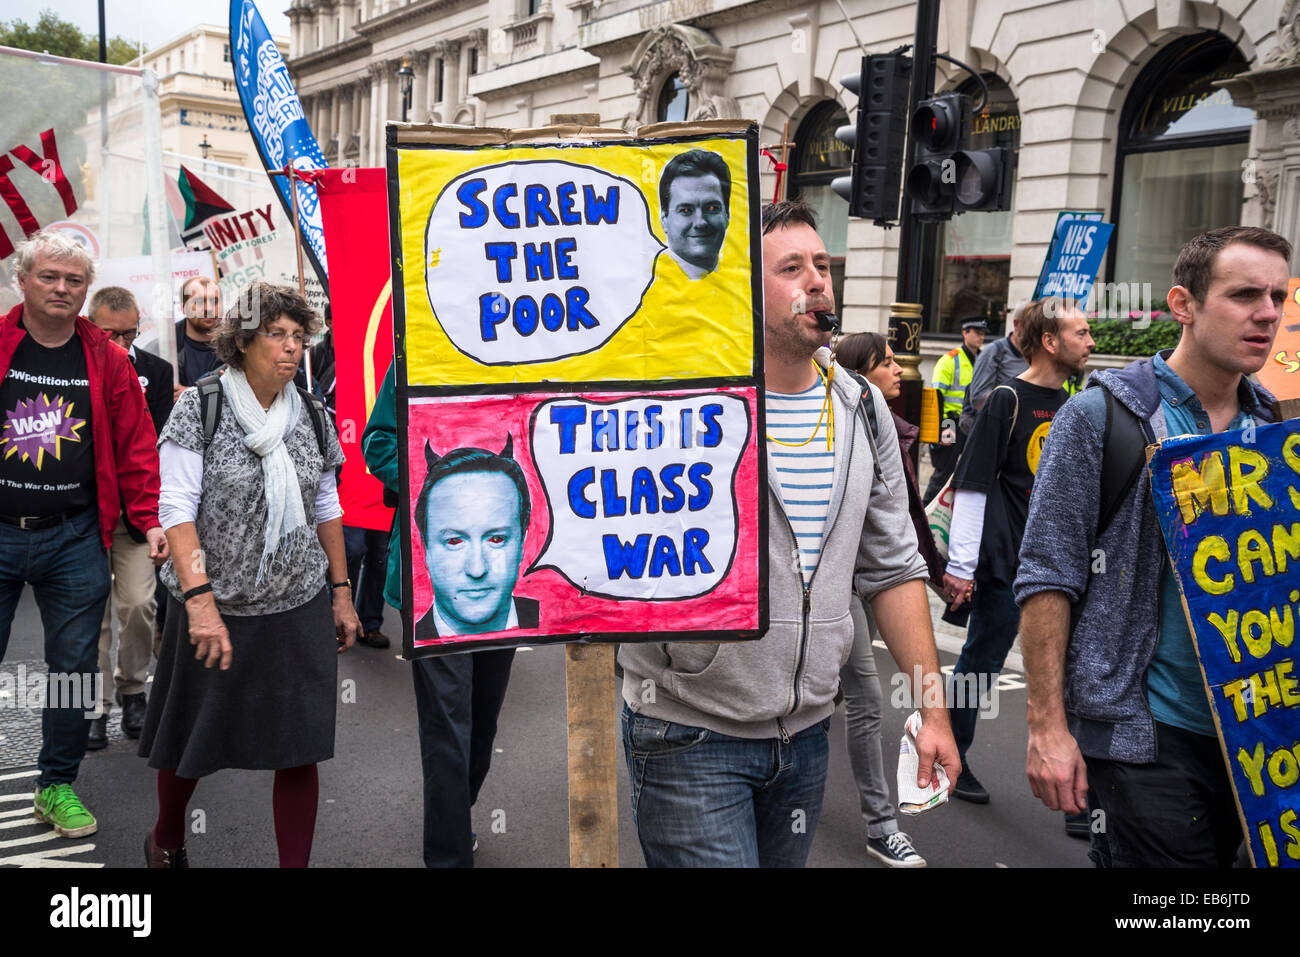 Britain Needs a Pay Rise march, London, 18 October 2014, UK Stock Photo